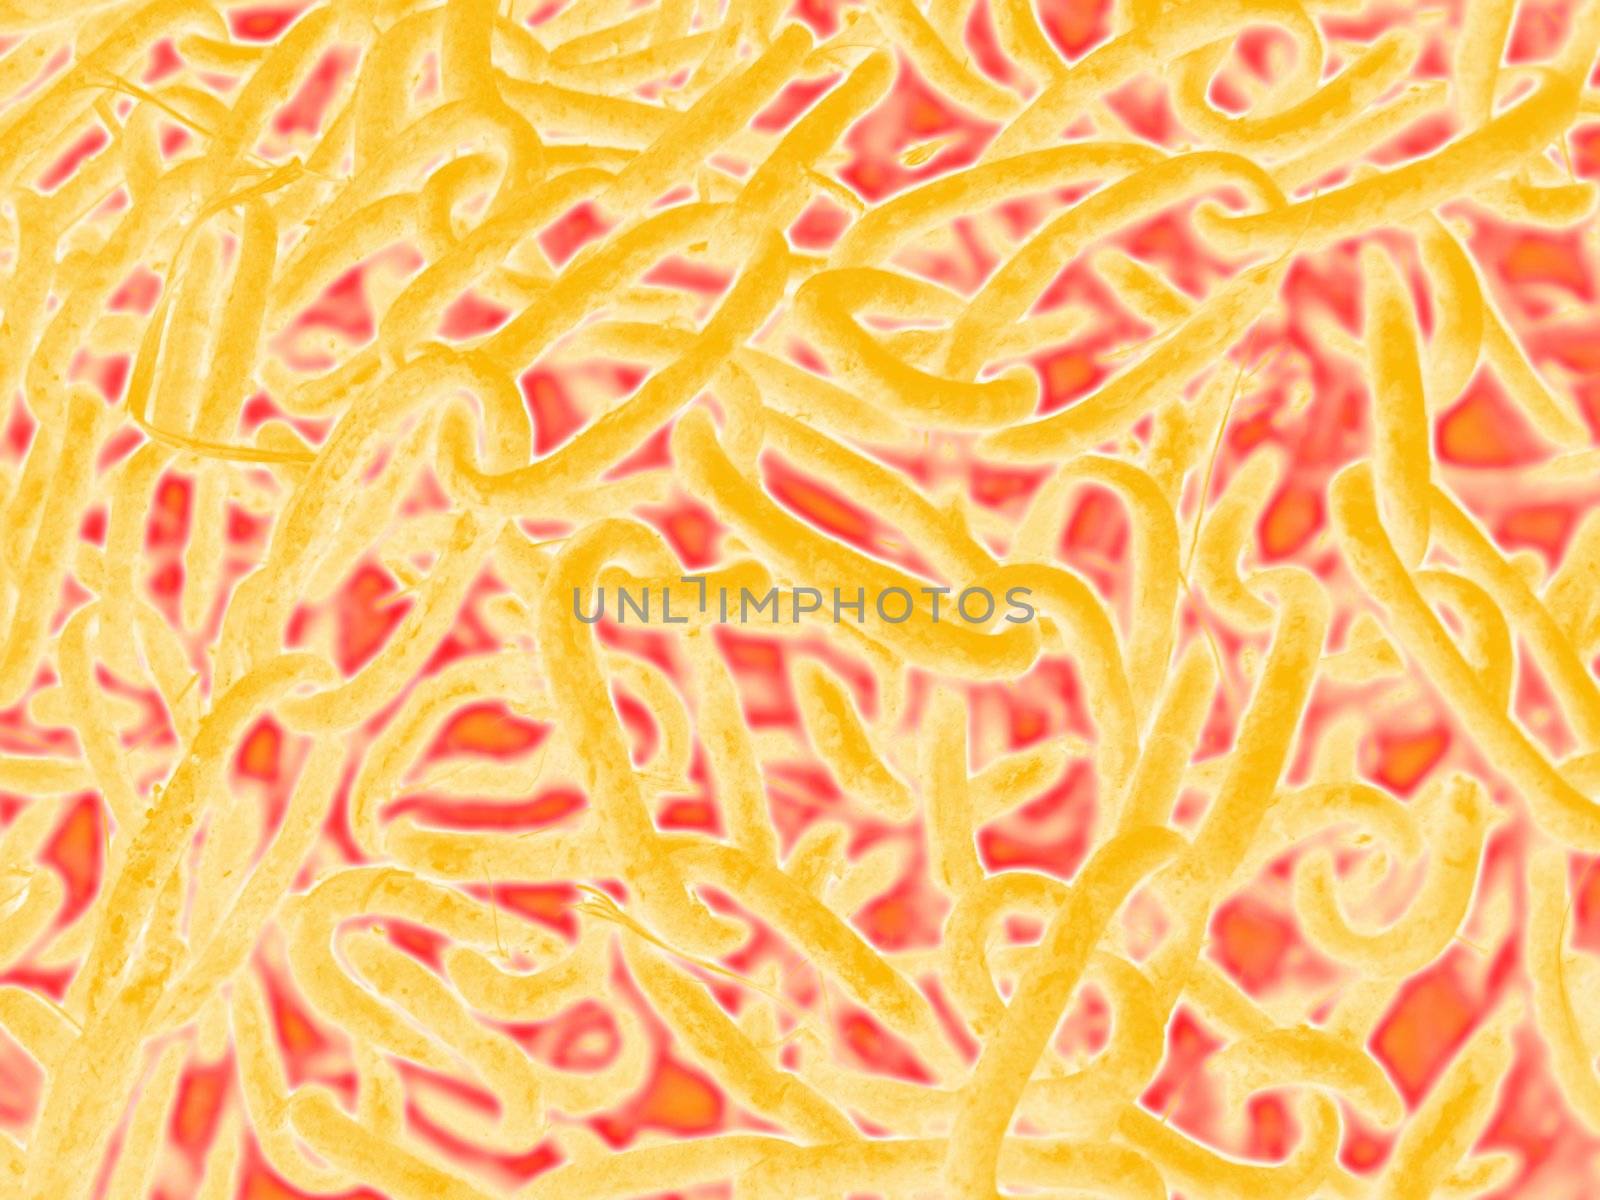 image of yellow and red background with abstract rings